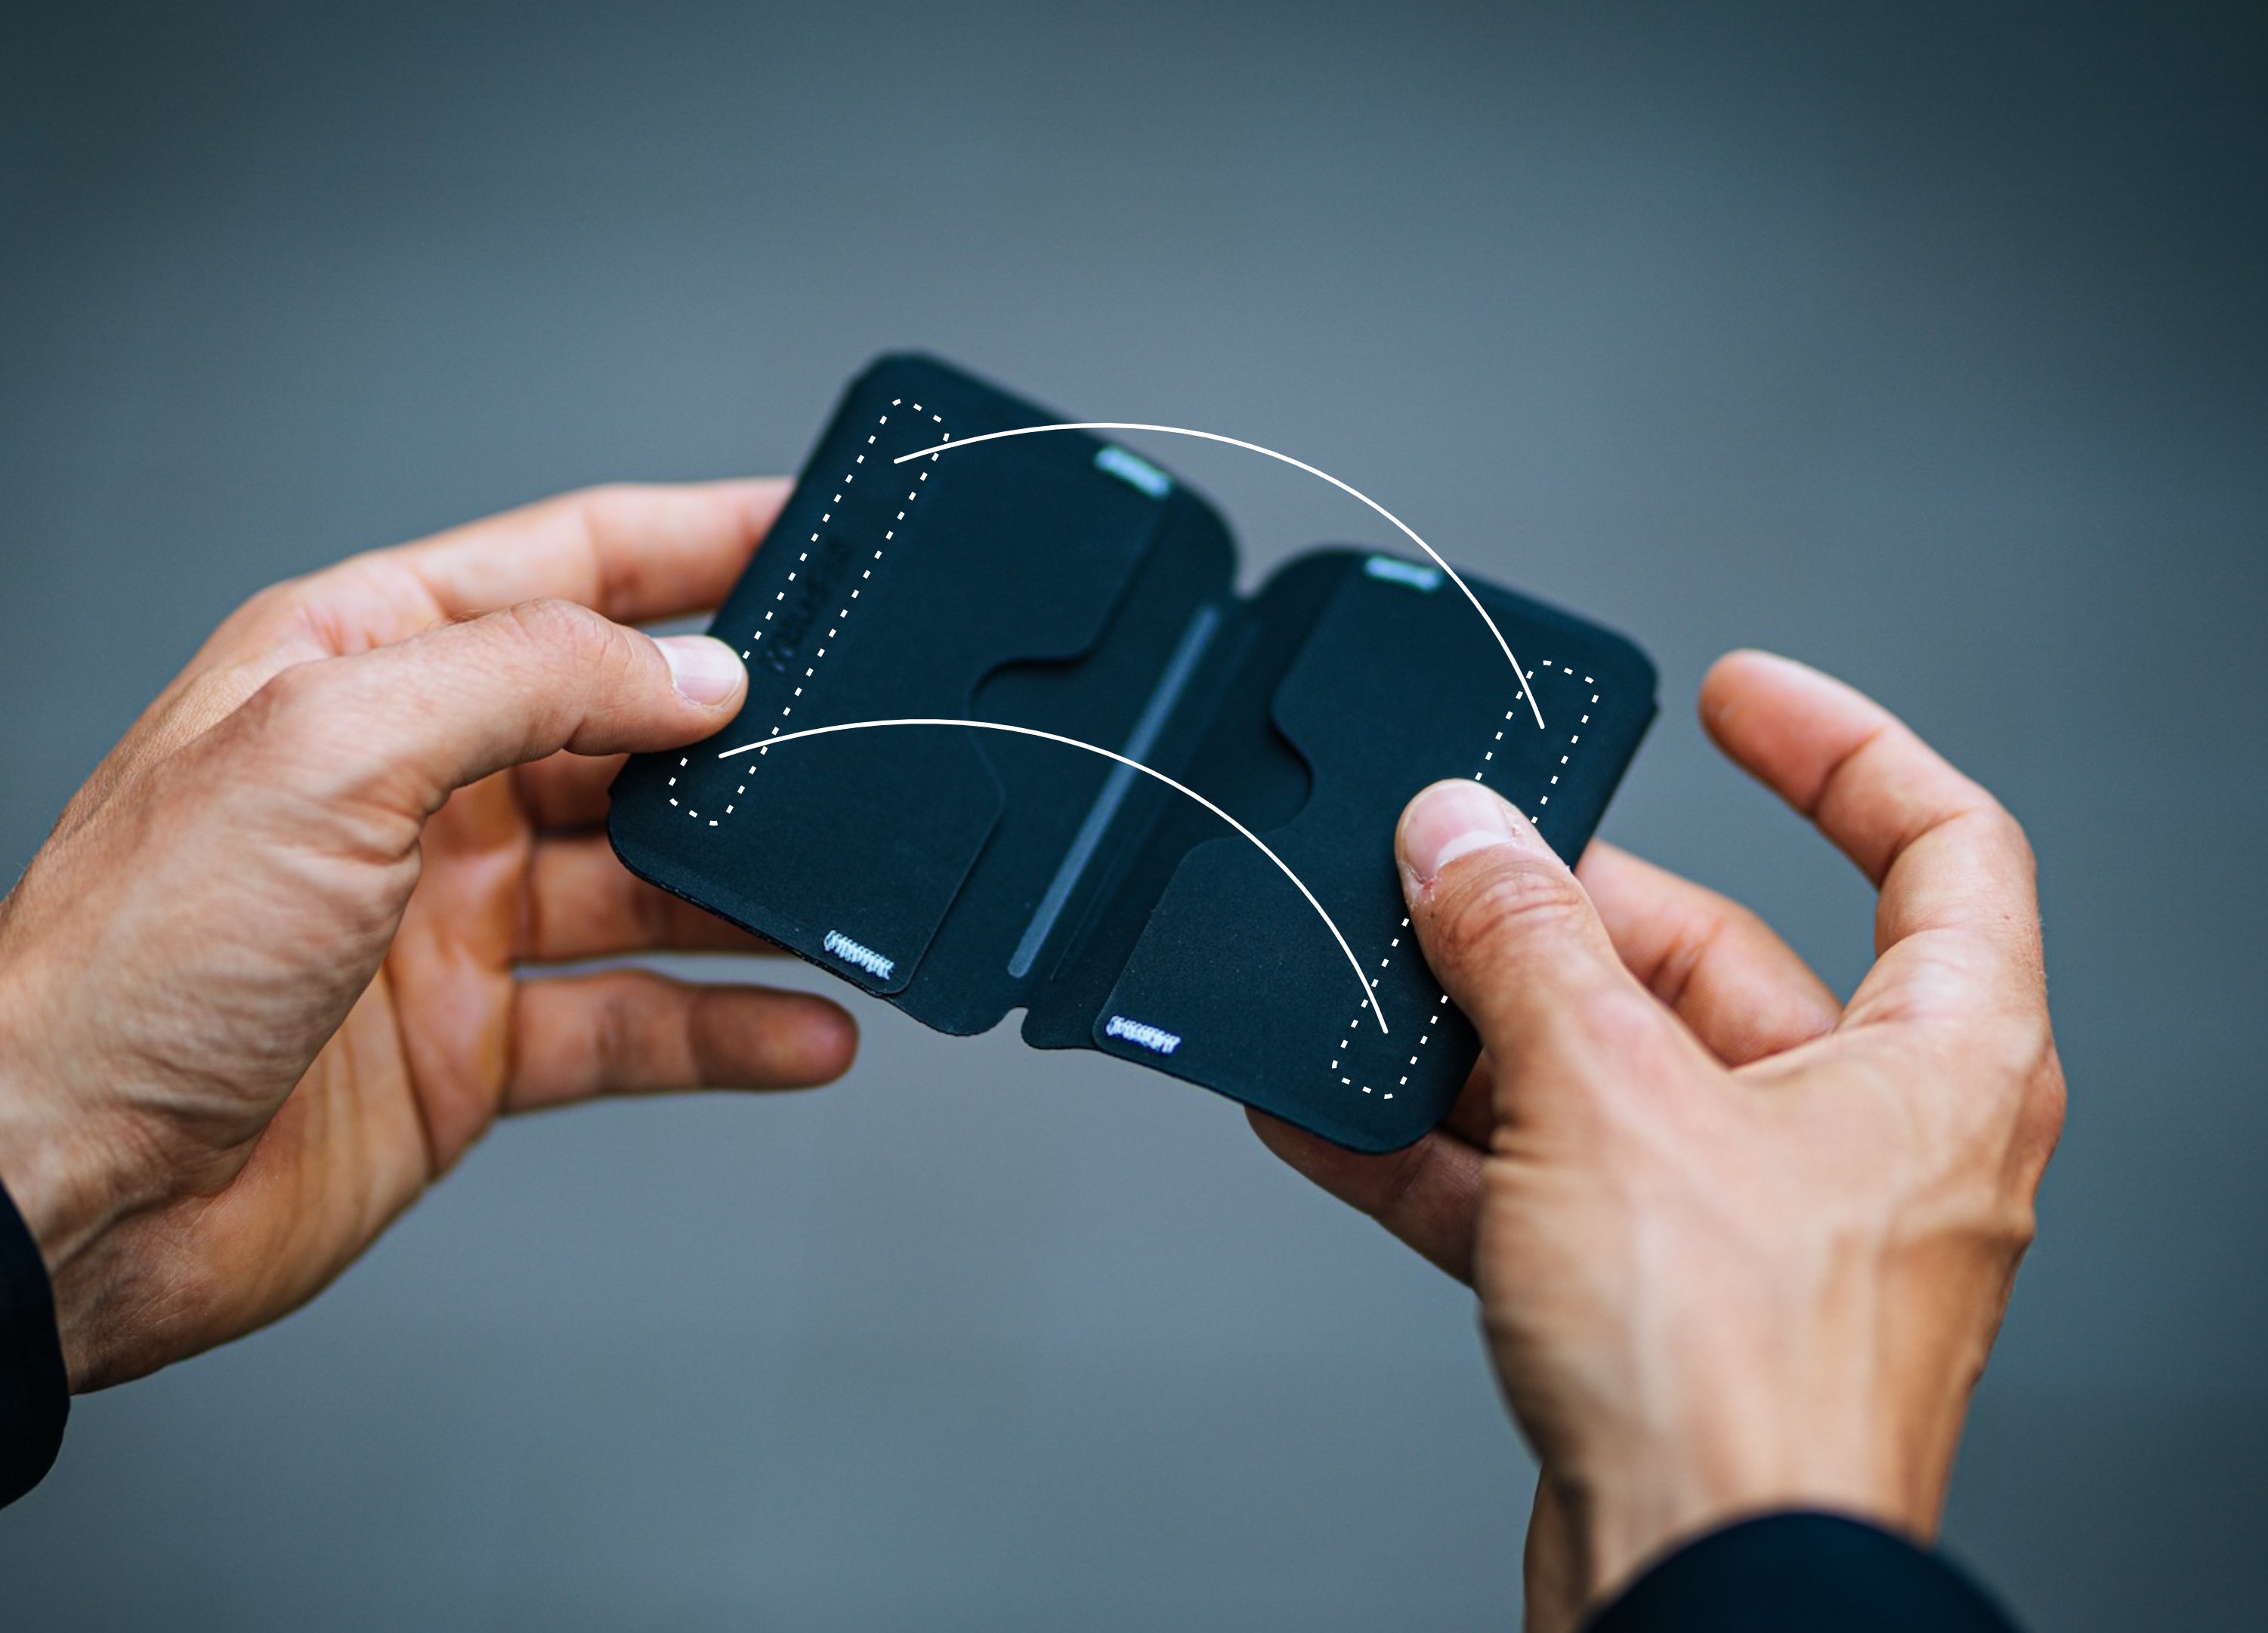 RE:FORM Coin Sleeve and Card Holder Wallets Feature a Secure Magnetic Closing Mechanism